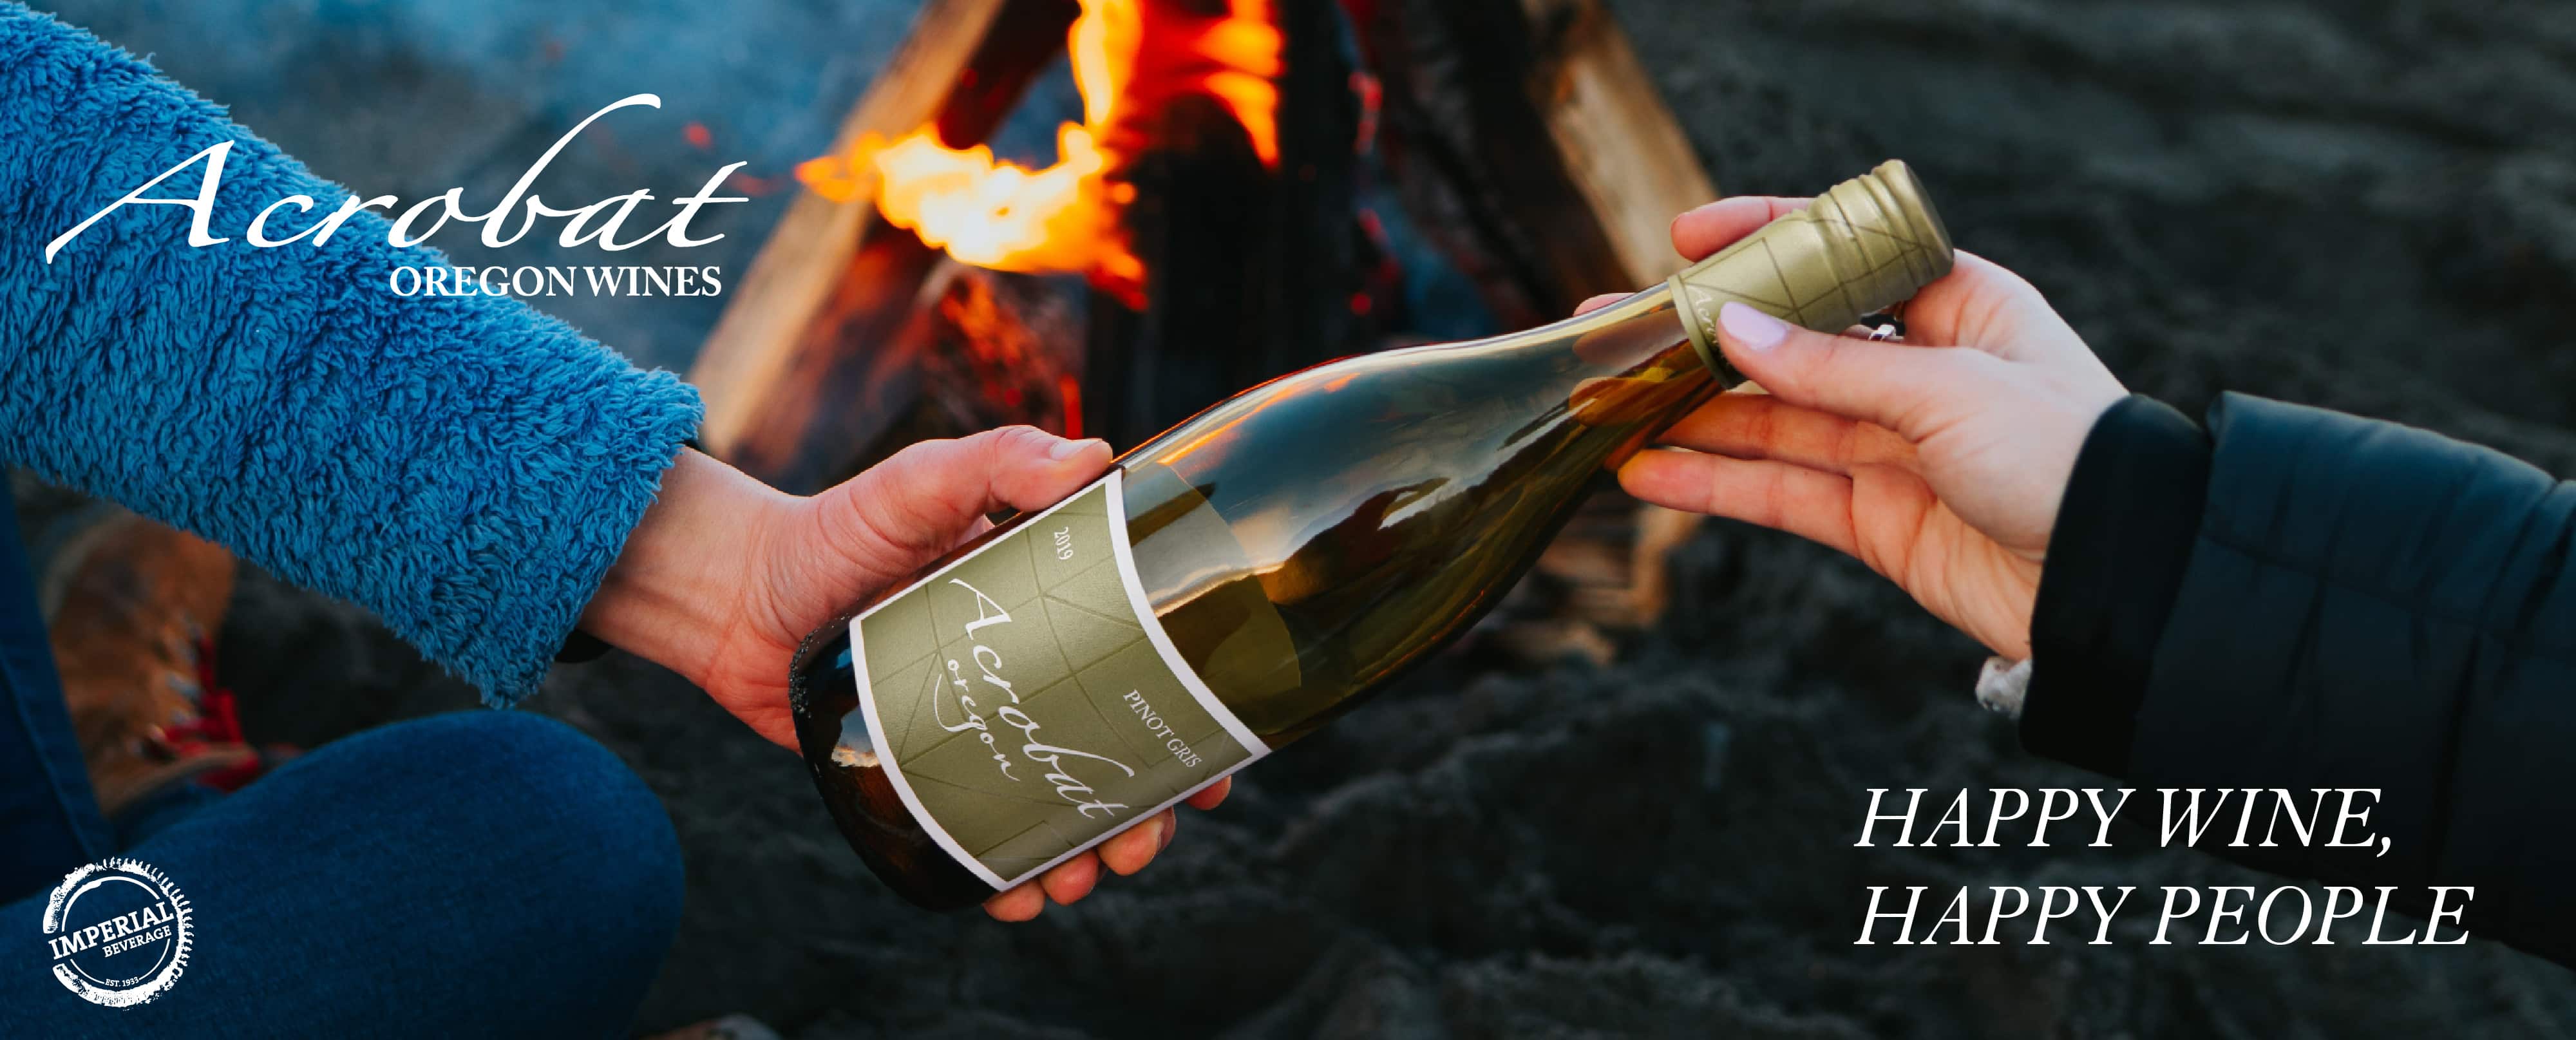 Acrobat, Wine, Pinot Gris, Happy Wine, Happy People, Campfire, Outdoors, Cool, Cold, Oregon Wine